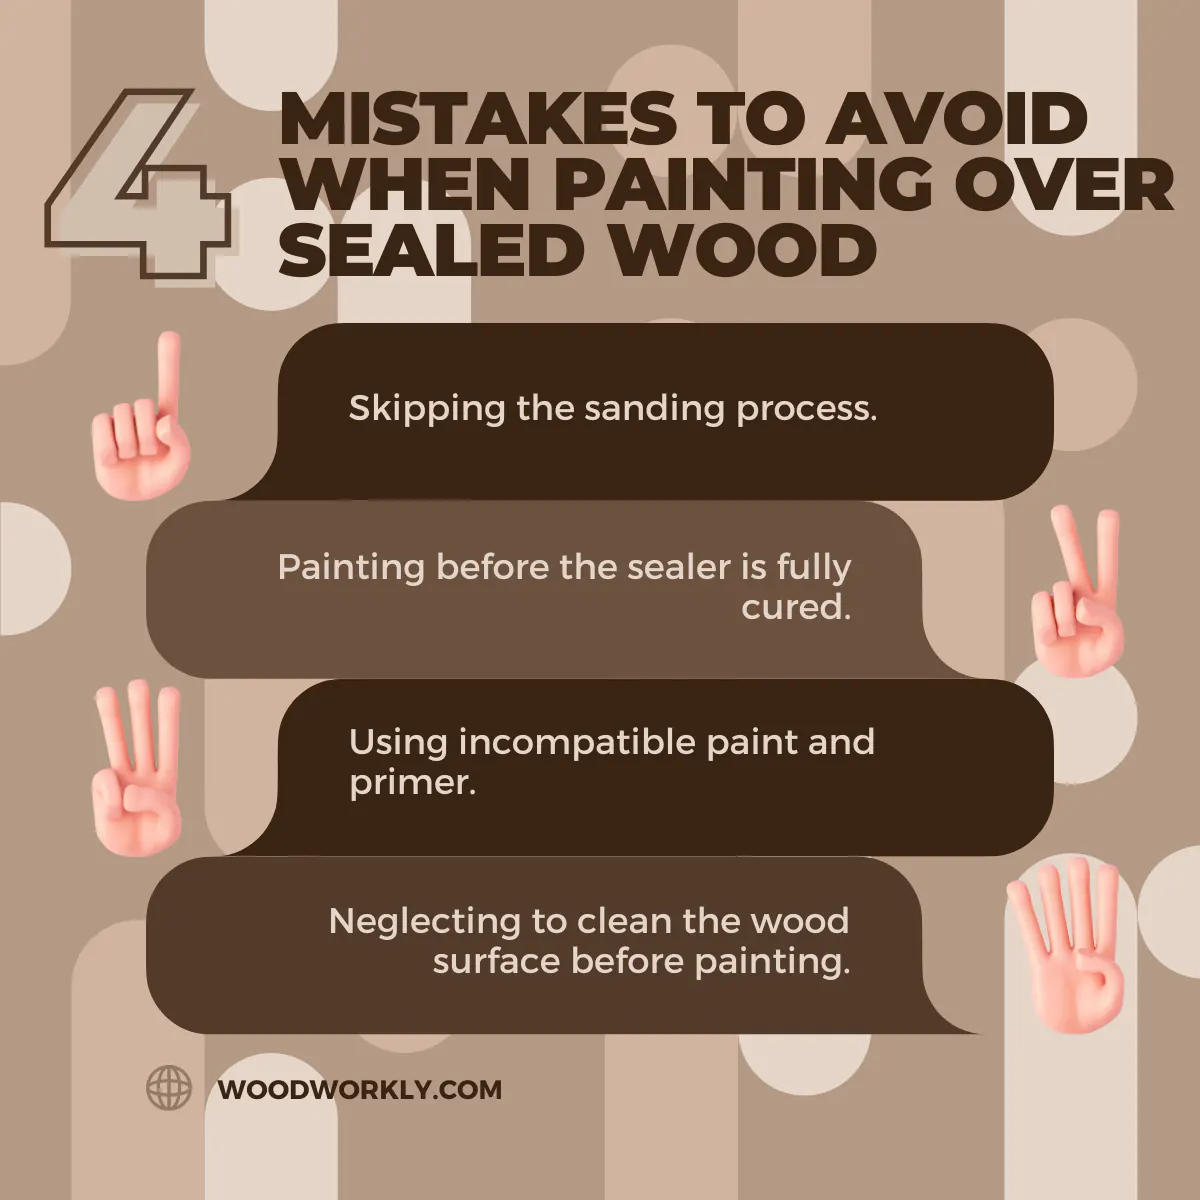 Mistakes to avoid when painting over sealed wood